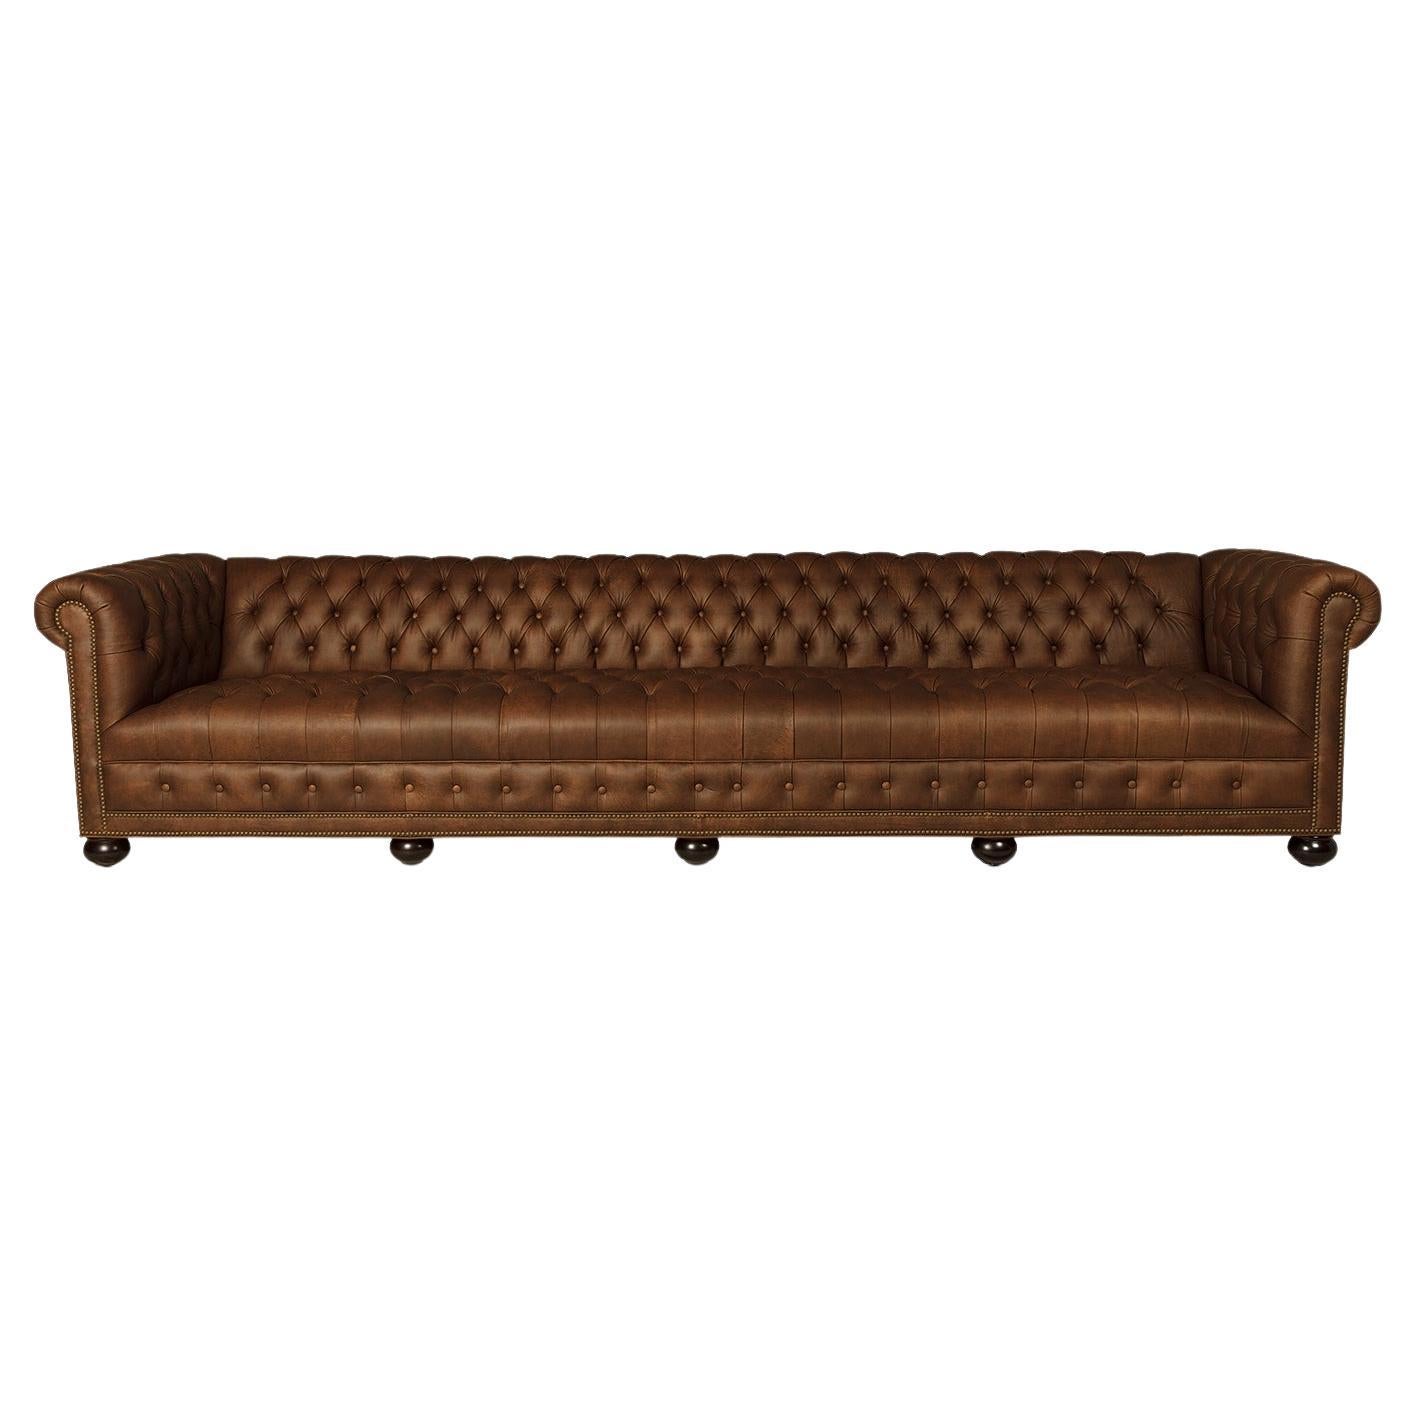 Leather 4 Seater Chesterfield Sofa